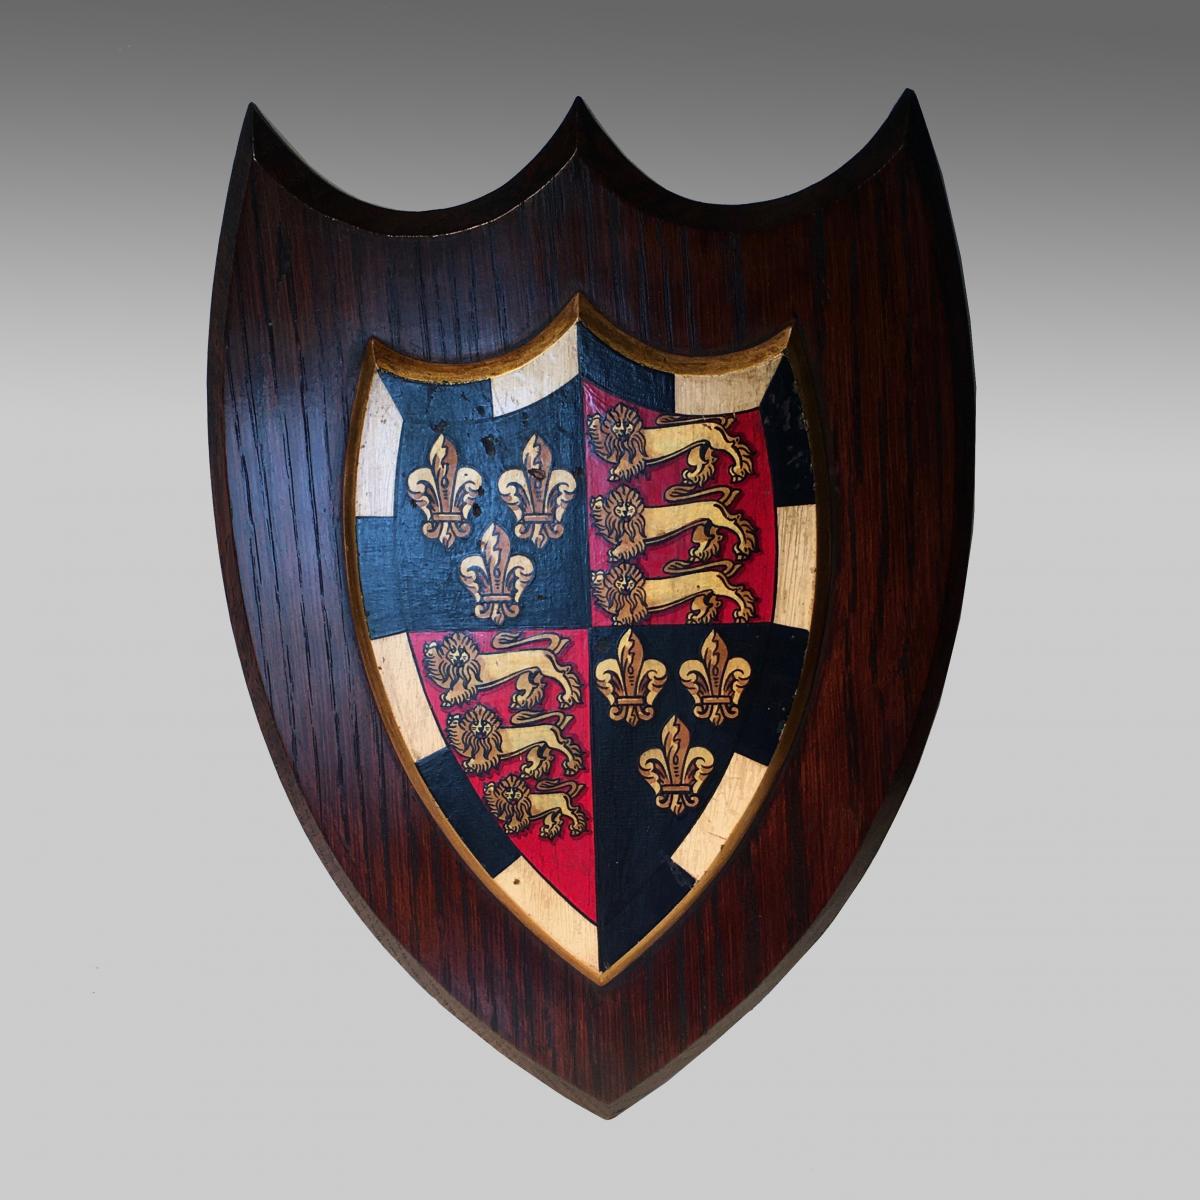 Vintage coat of arms for St. John's College, Cambridge